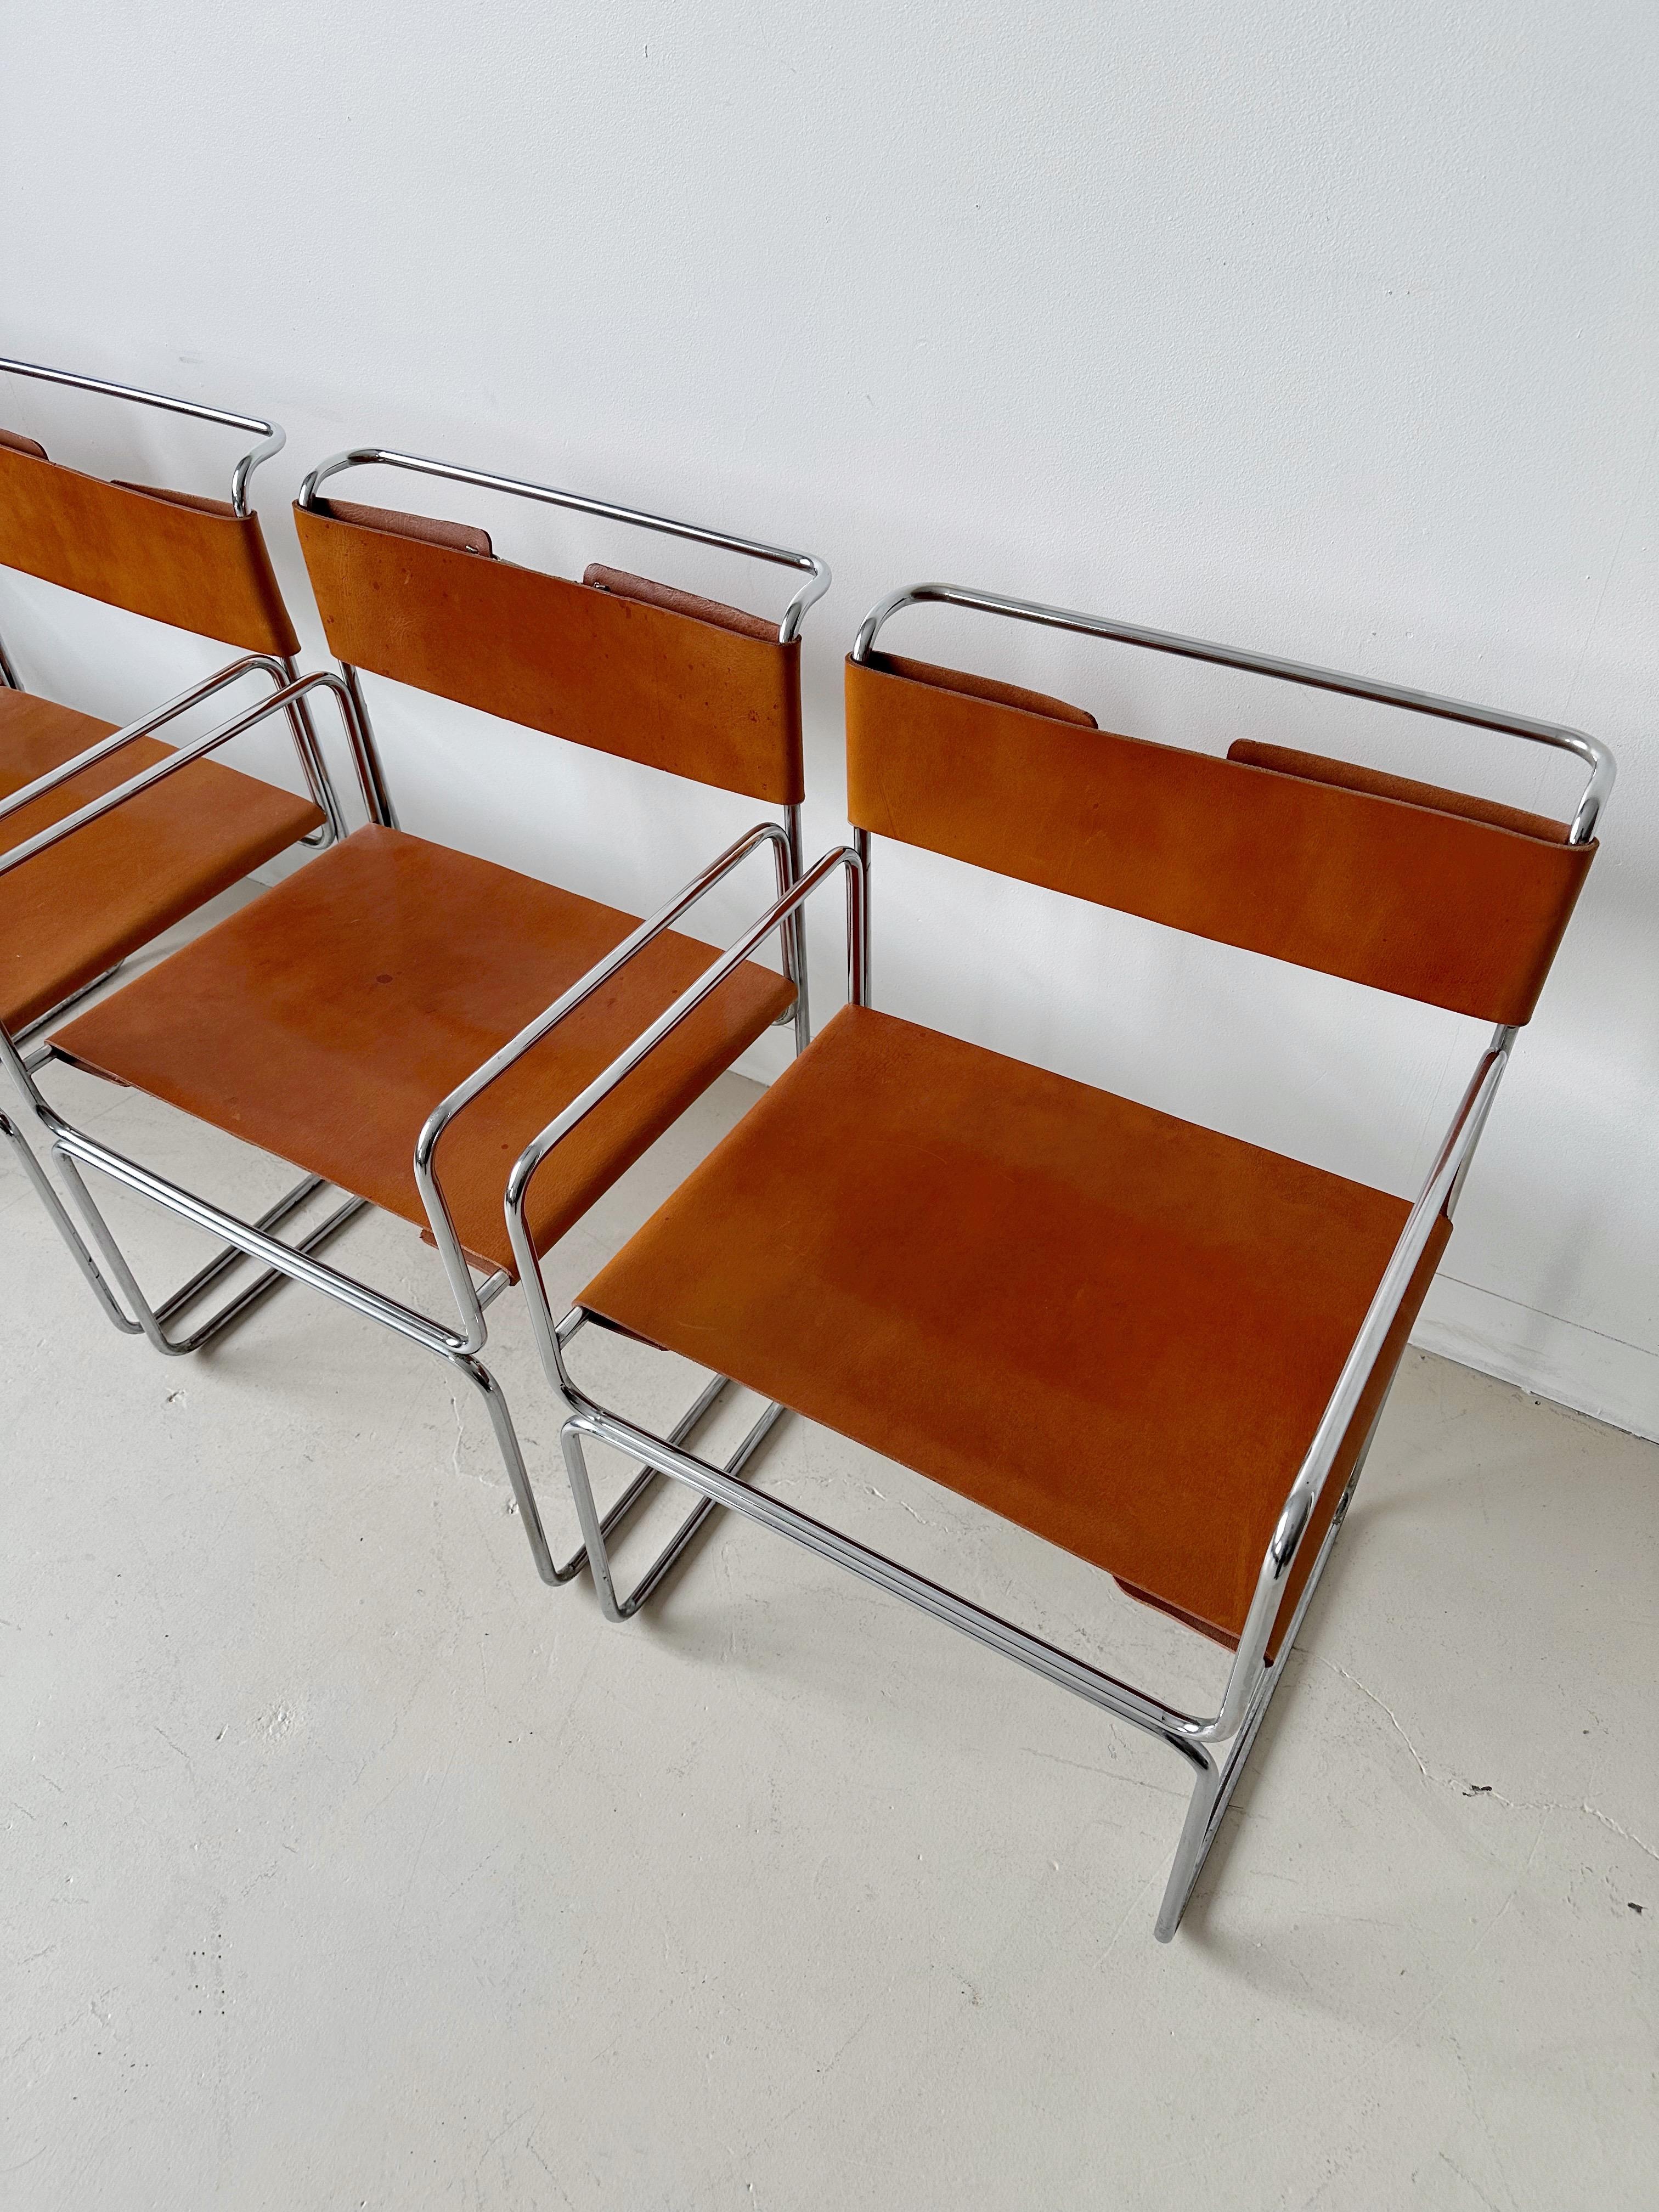 Steel Tan Leather Libellula Chairs by Giovanni Carini for Planula, 70's